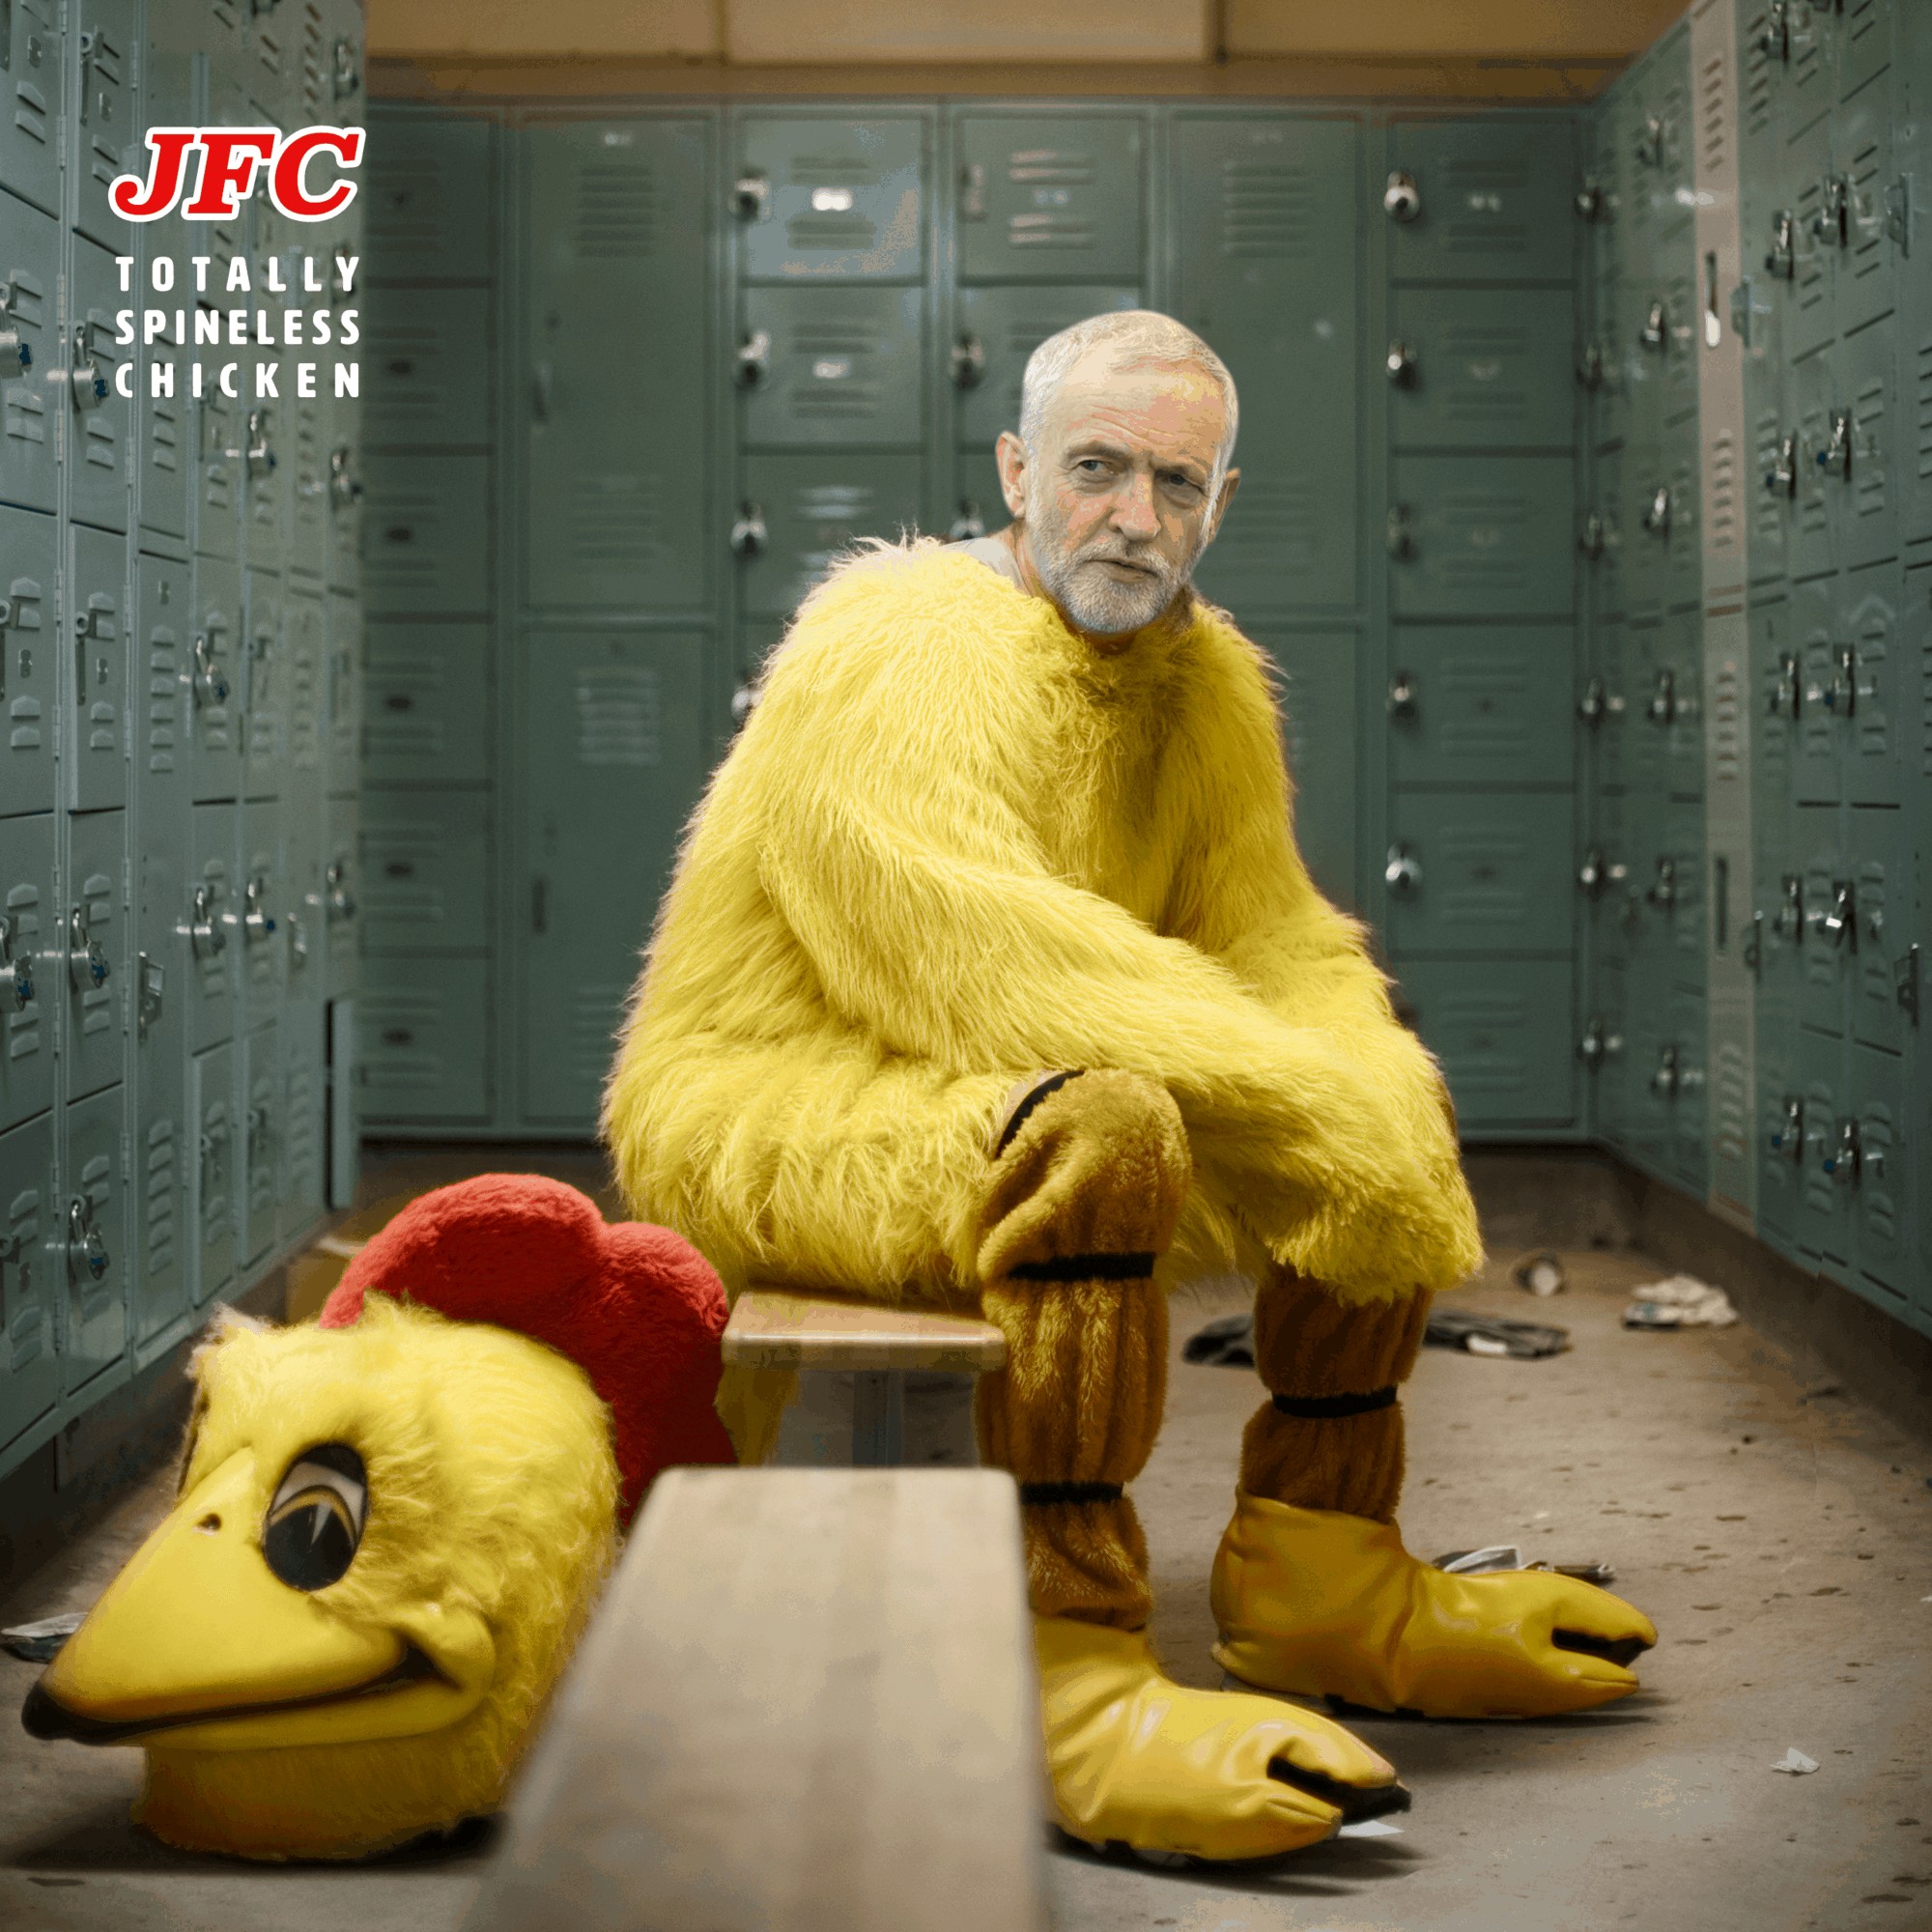 Criticism as Corbyn depicted as chicken in Conservative advert